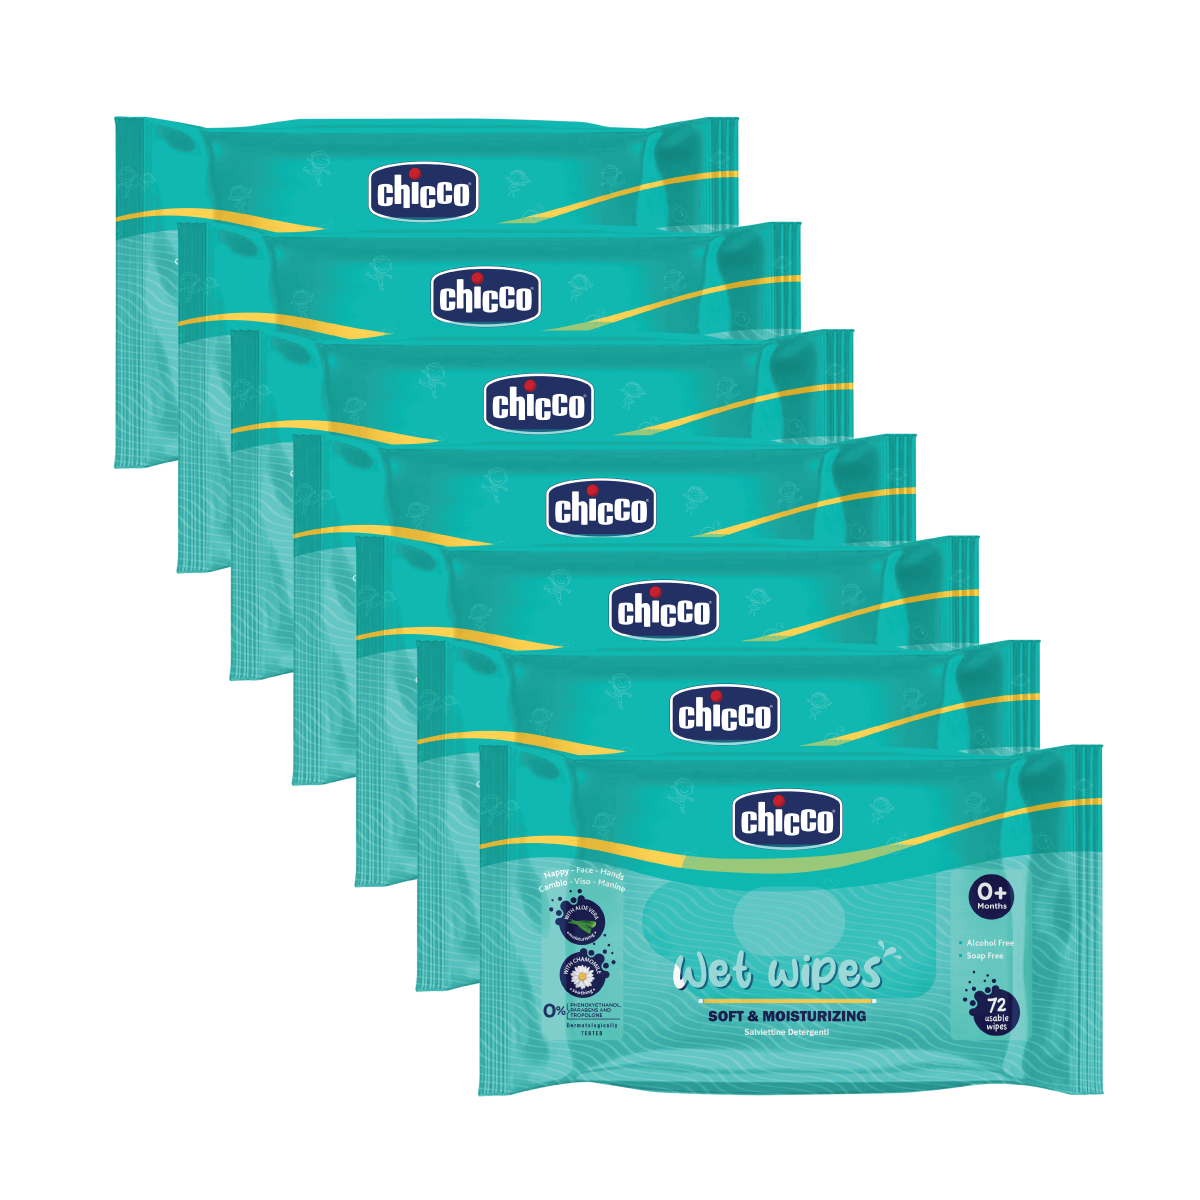 Chicco Wetwipes Pack of 7-504 PCS